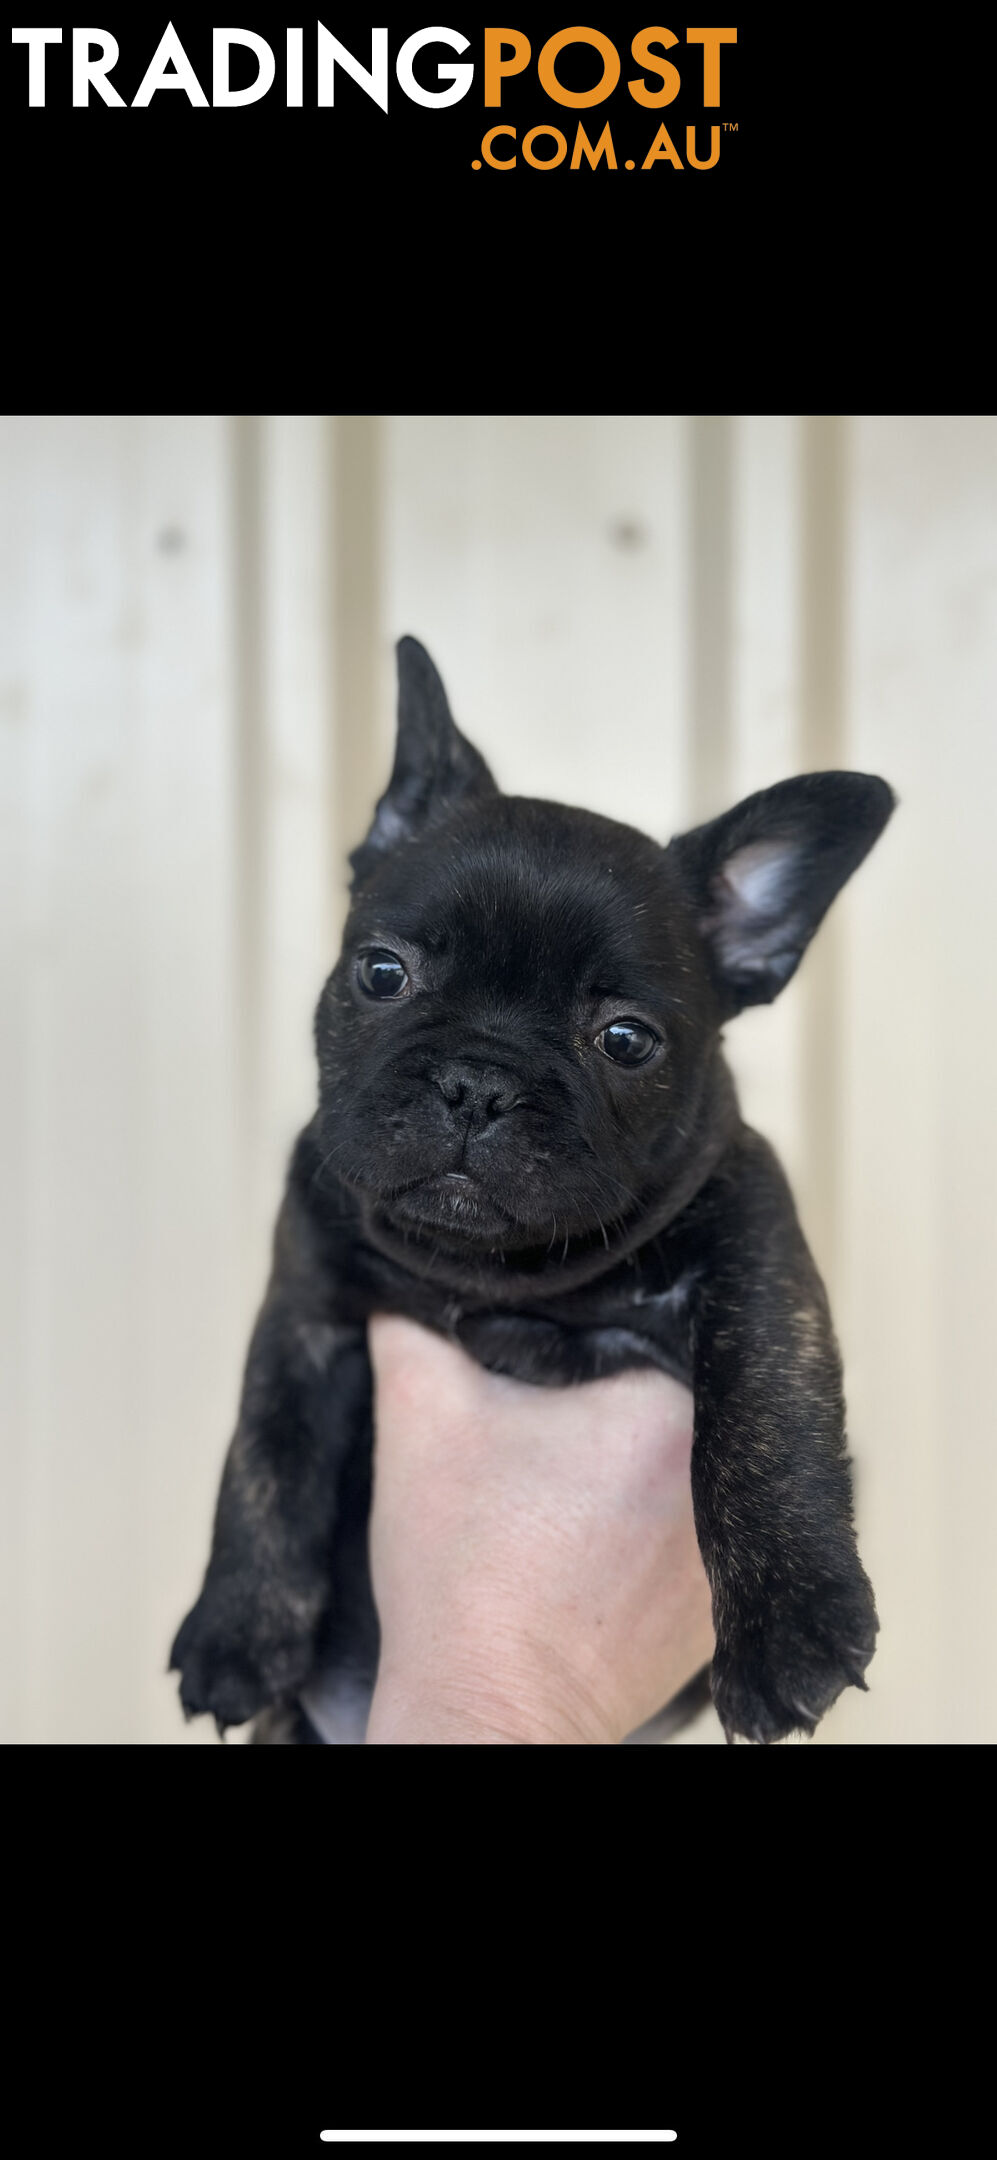 Purebred French bulldog Puppys ready to go to forever homes!